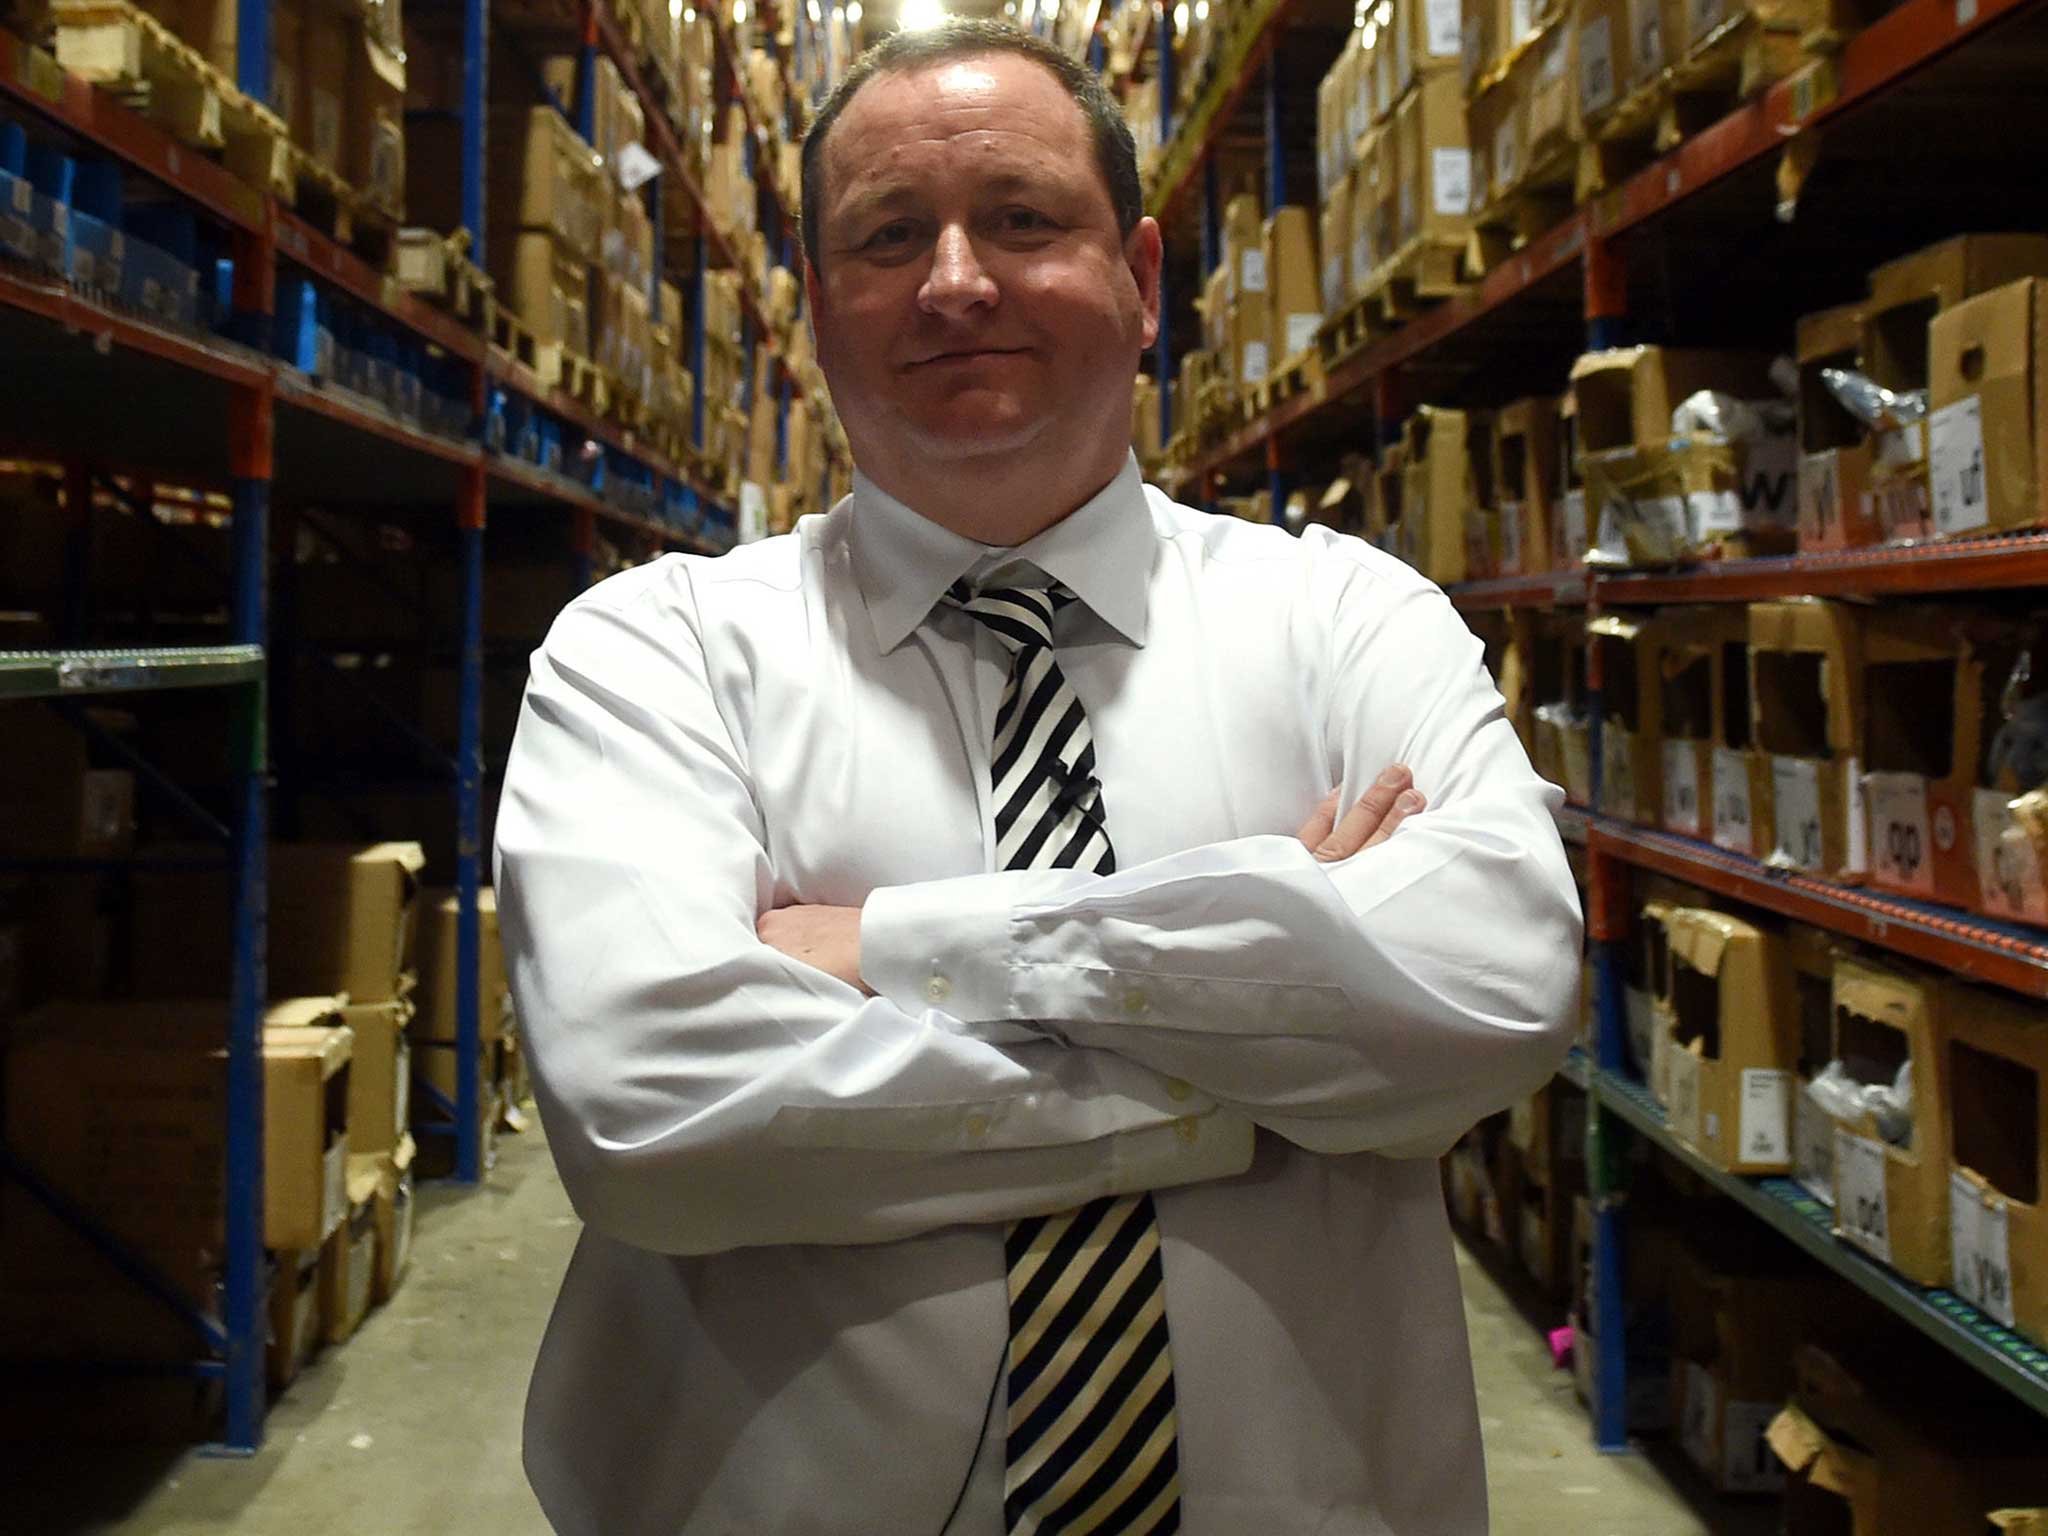 Sports Direct founder Mike Ashley, who appeared in front of a committee of MPs this week to discuss working practices inside his company's warehouses